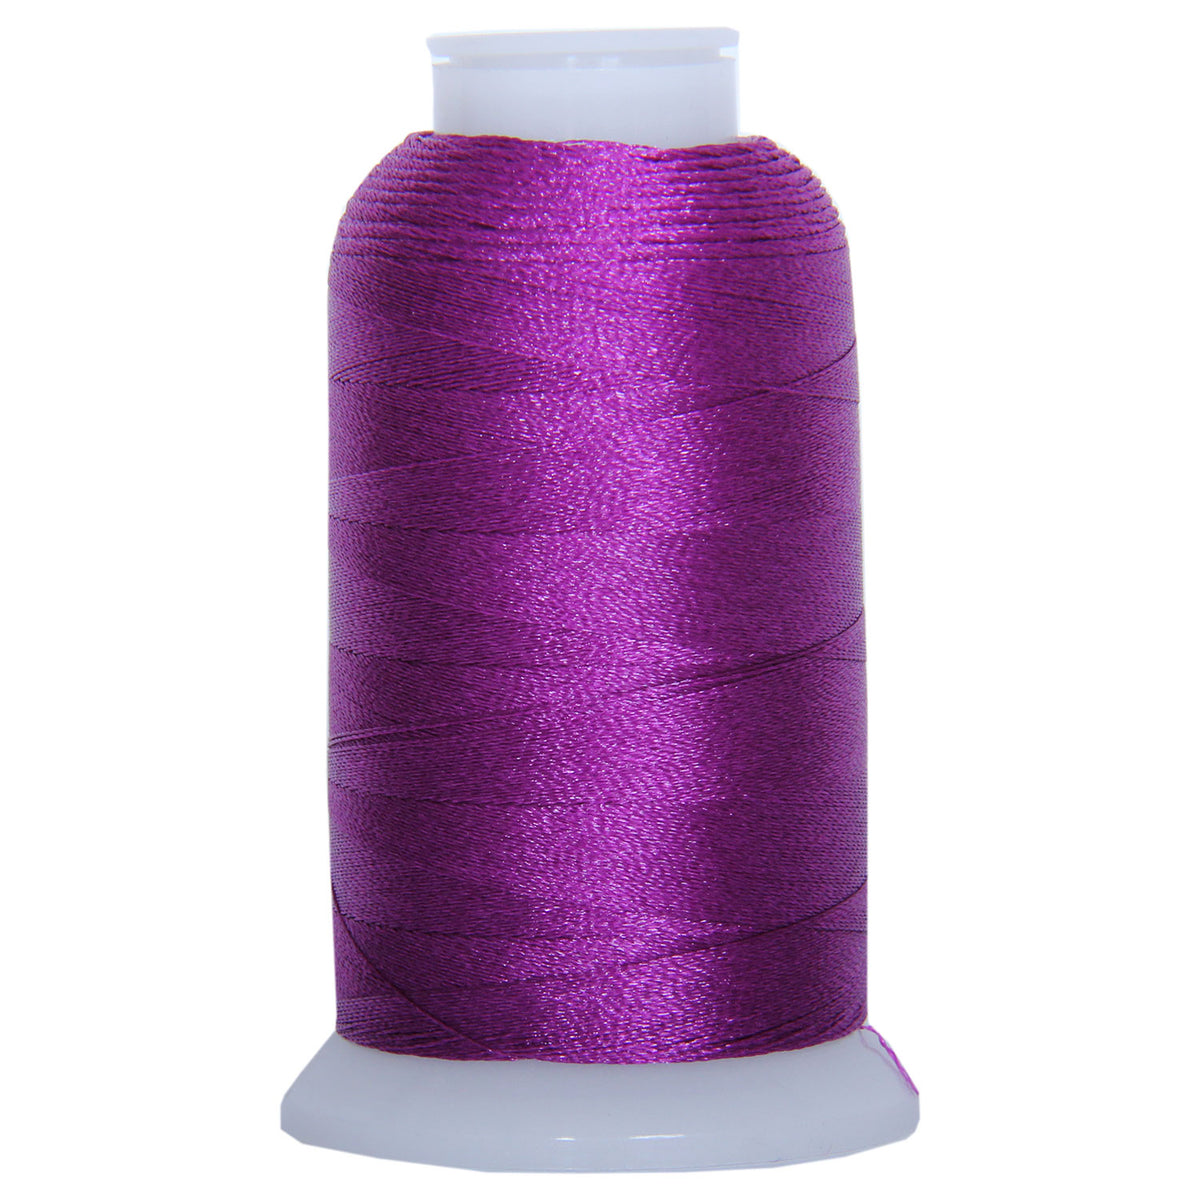 Threadart Polyester Machine Embroidery Thread - No. 934 - Electric Blue - 1000M - 220 Colors